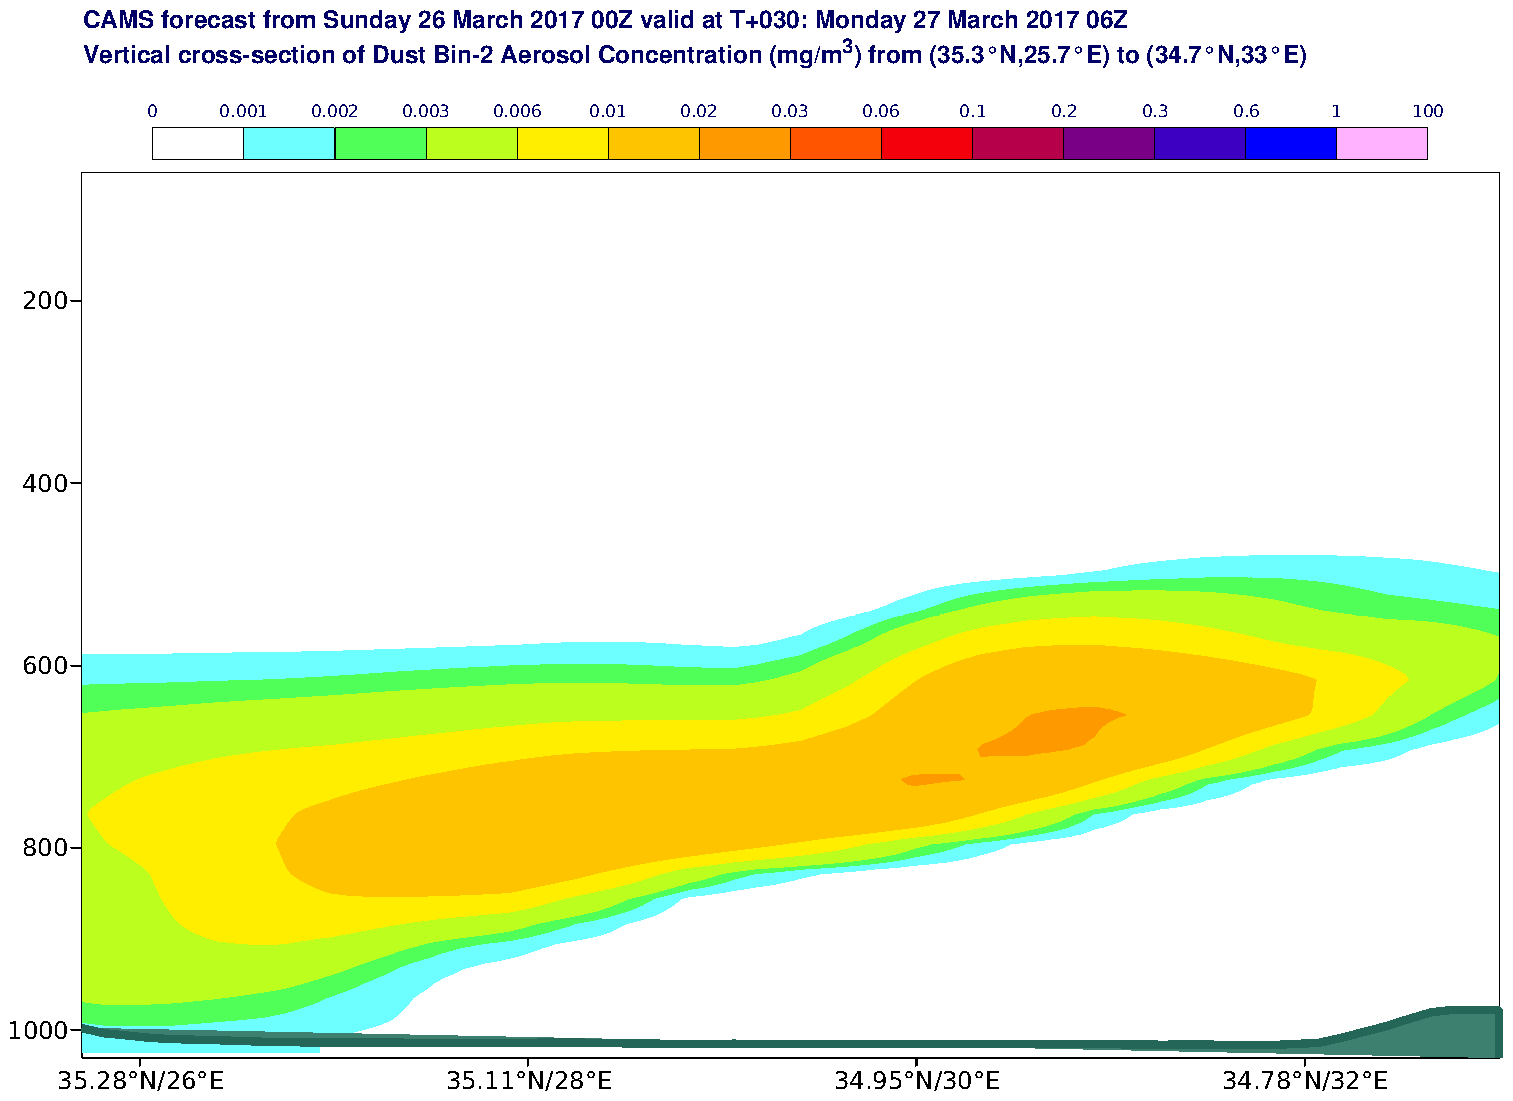 Vertical cross-section of Dust Bin-2 Aerosol Concentration (mg/m3) valid at T30 - 2017-03-27 06:00